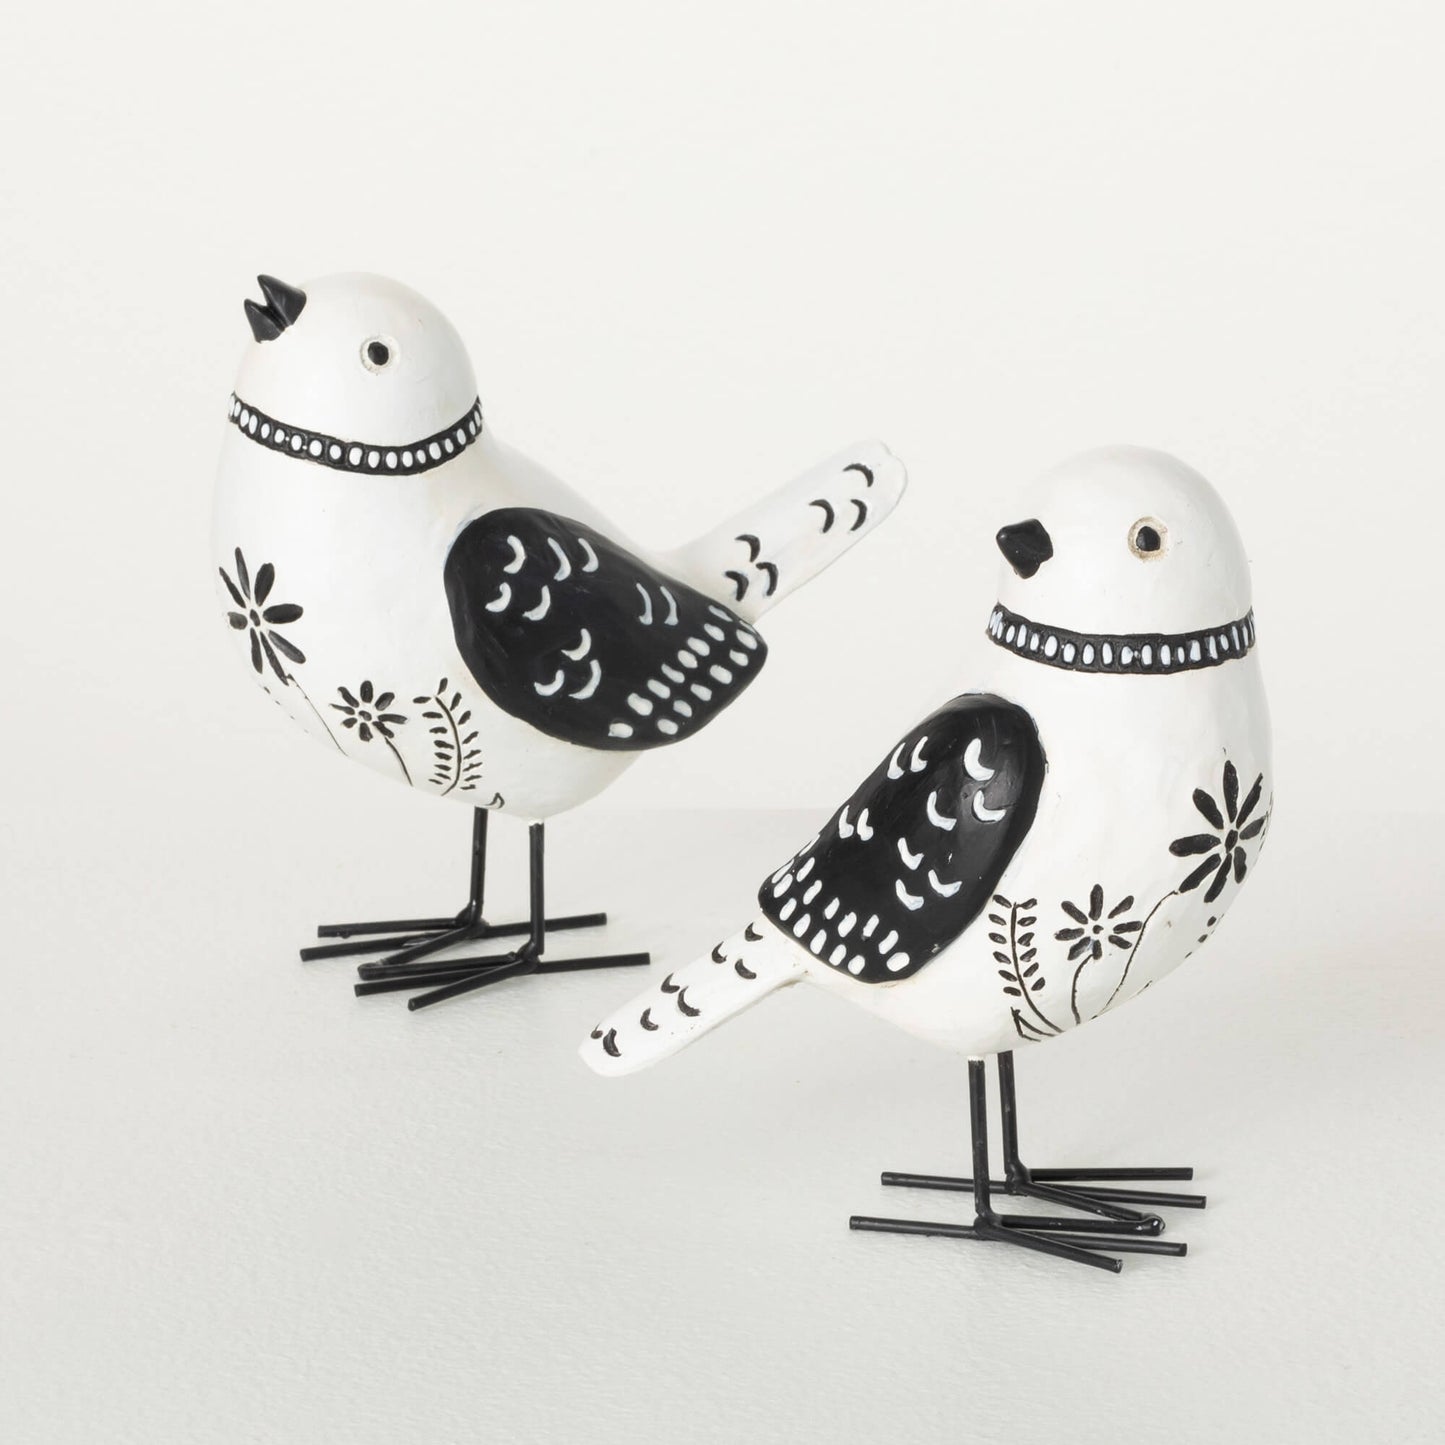 Painted Whimsical Bird Figures